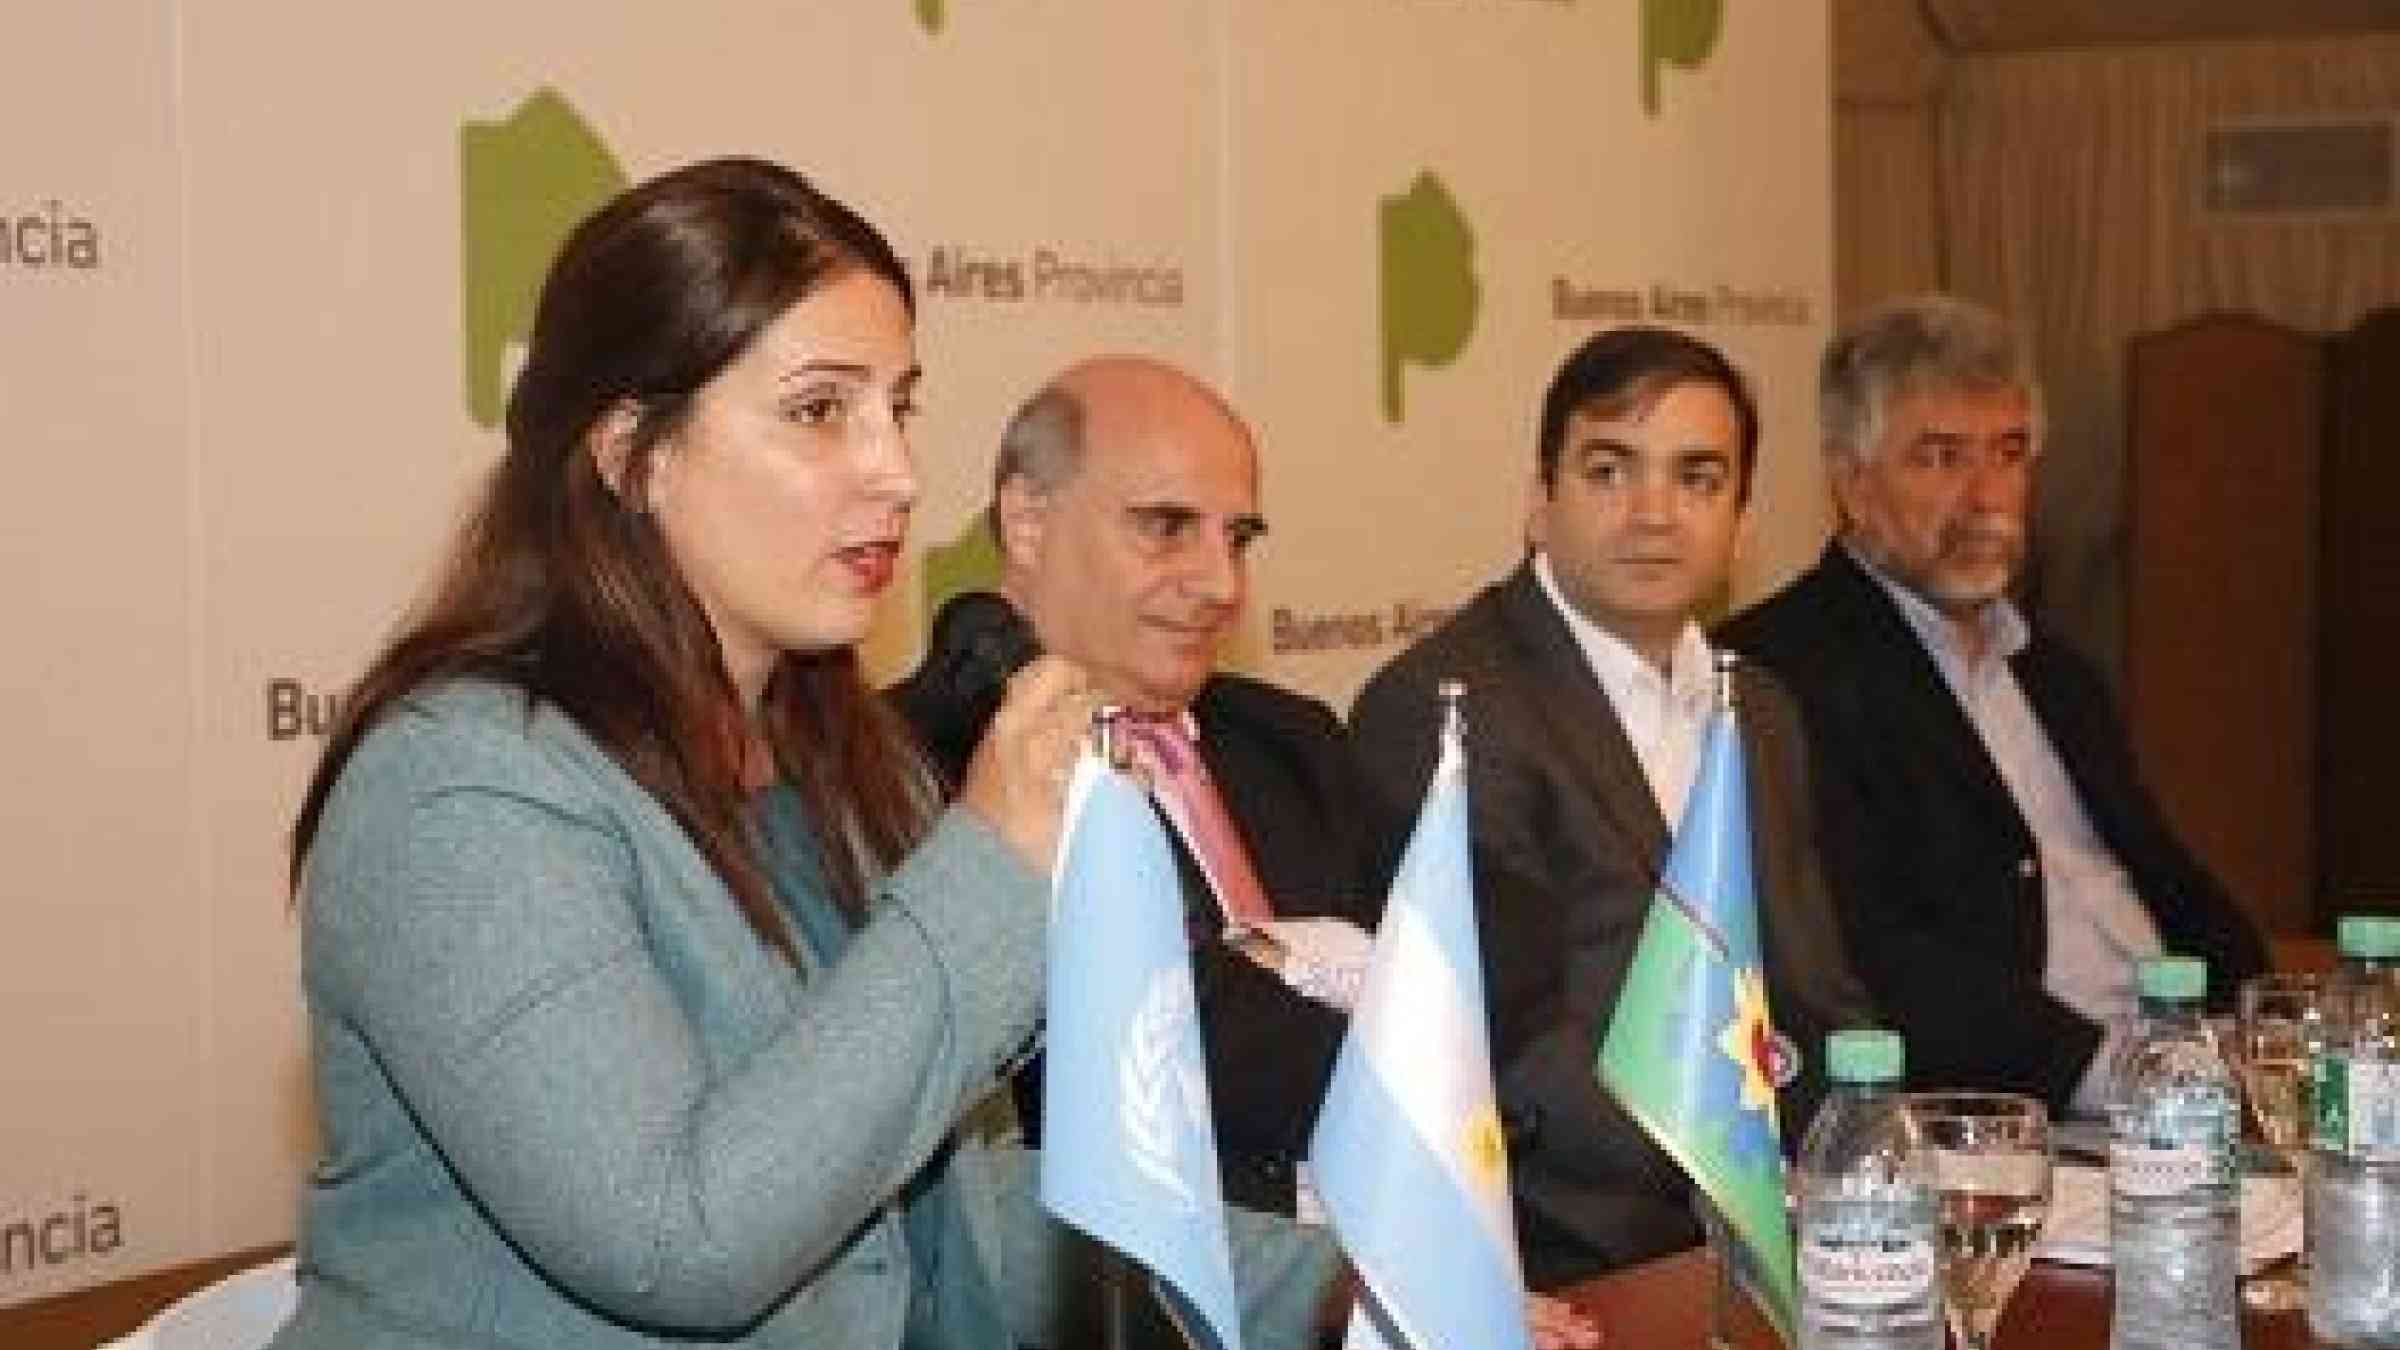 (From left) Ms. Virginia Laino, Provincial Director of Risk Management and Emergencies, Dr. Mariano Goicochea y Garayar, Vice-President of the White Helmets Commission, Mr. Rodrigo Silvosa, Undersecretary of Hydraulics, and Mr. Néstor Gil Coner, Provincial Office for Sustainable Development (Photo: Government of Argentina)